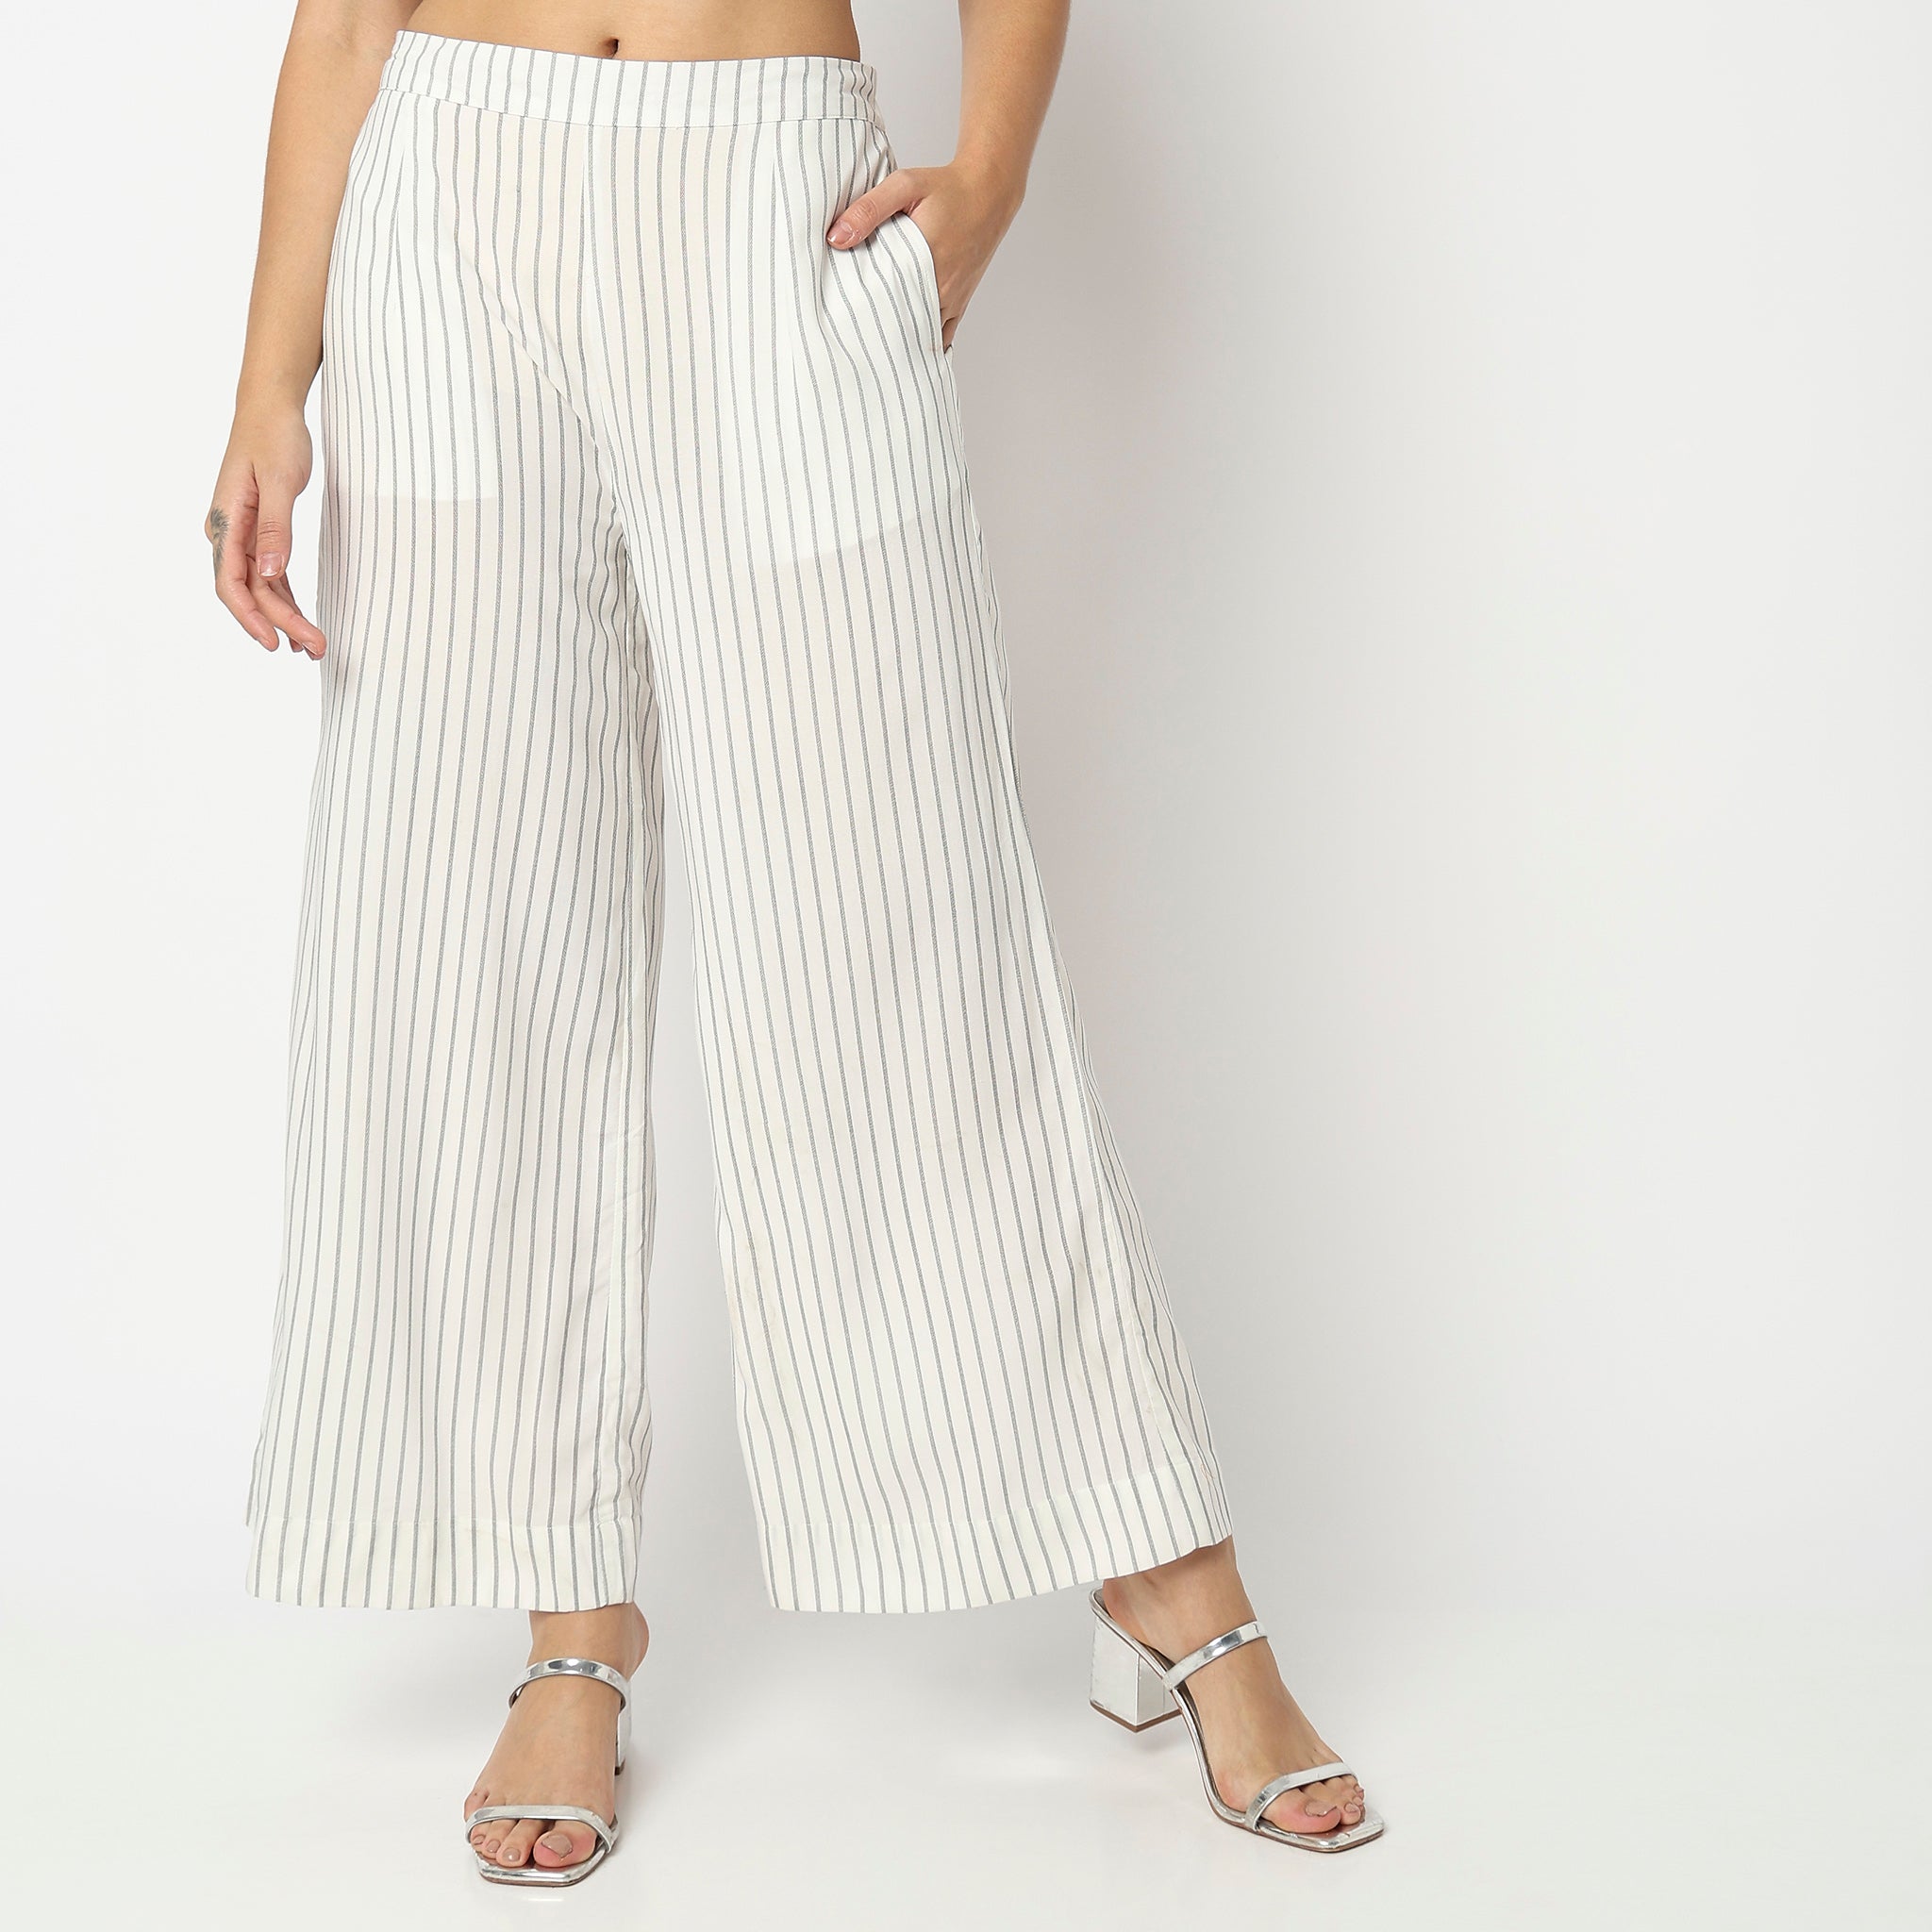 Flare Fit Striped High Rise Palazzo